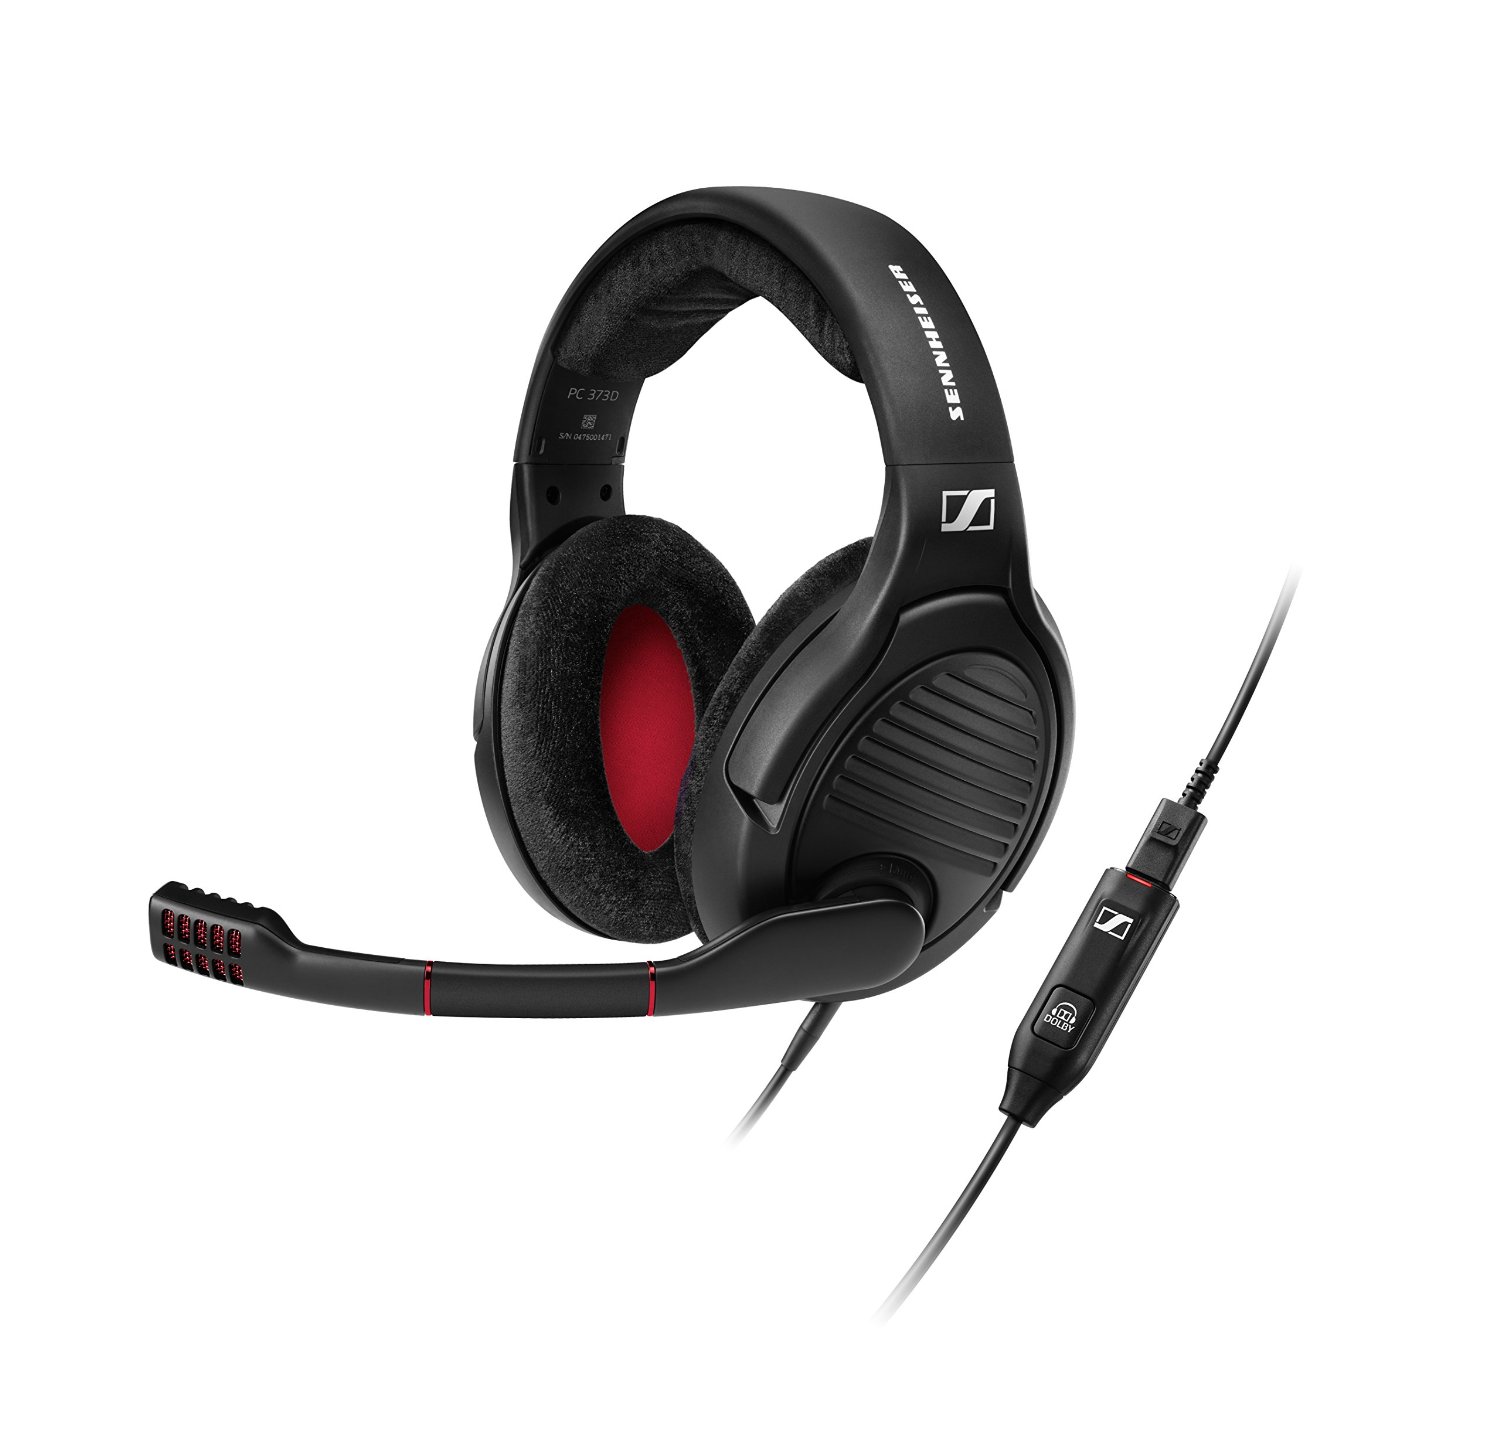 pc-373d-gaming-headset-01